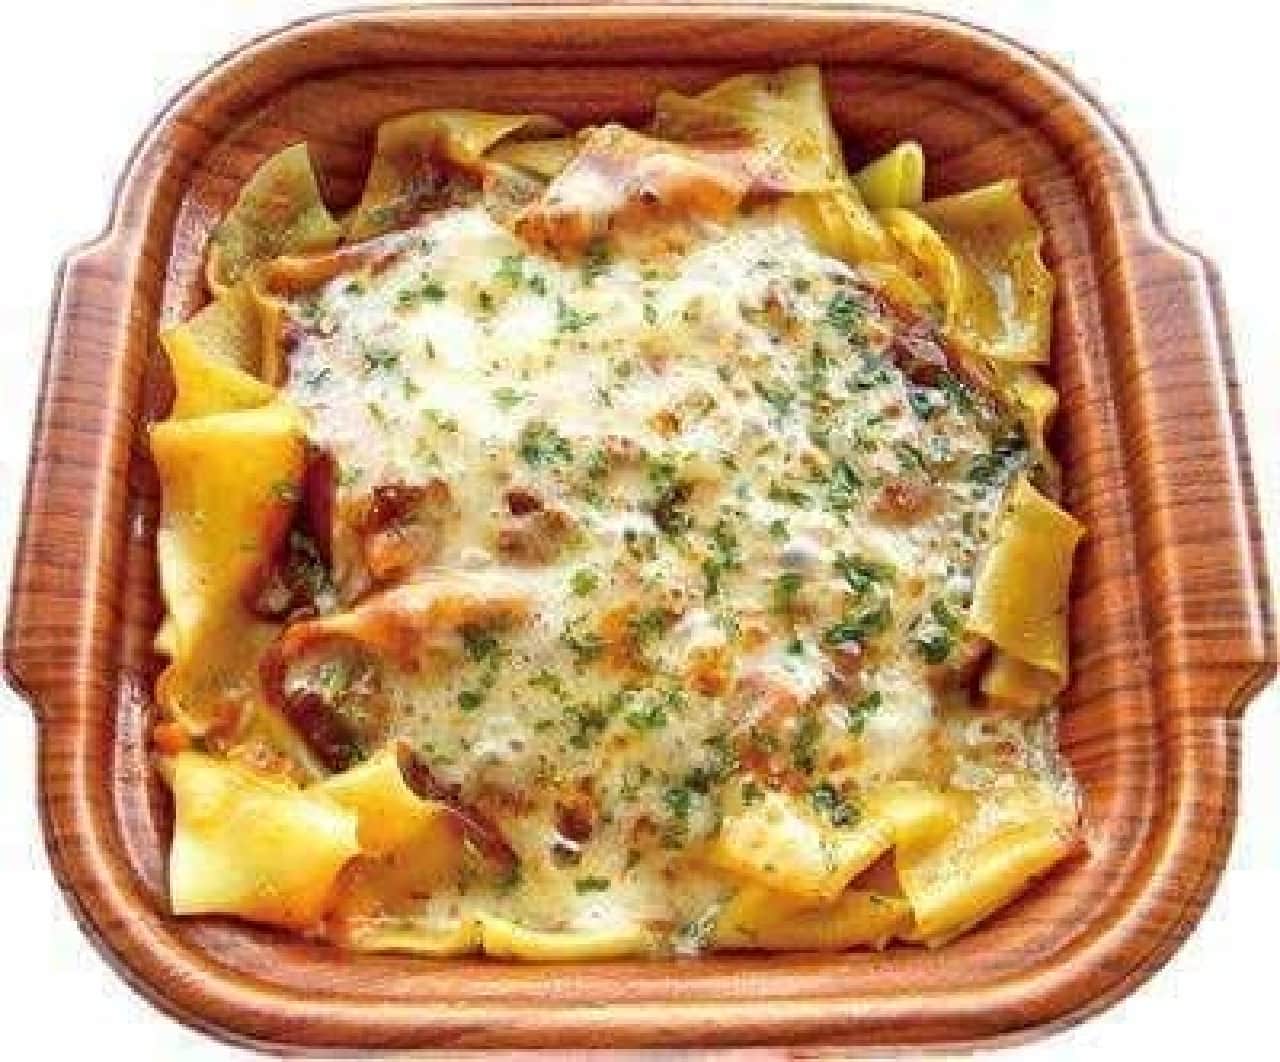 Lawson's "pasta shop" is a rich lasagna limited to autumn and winter